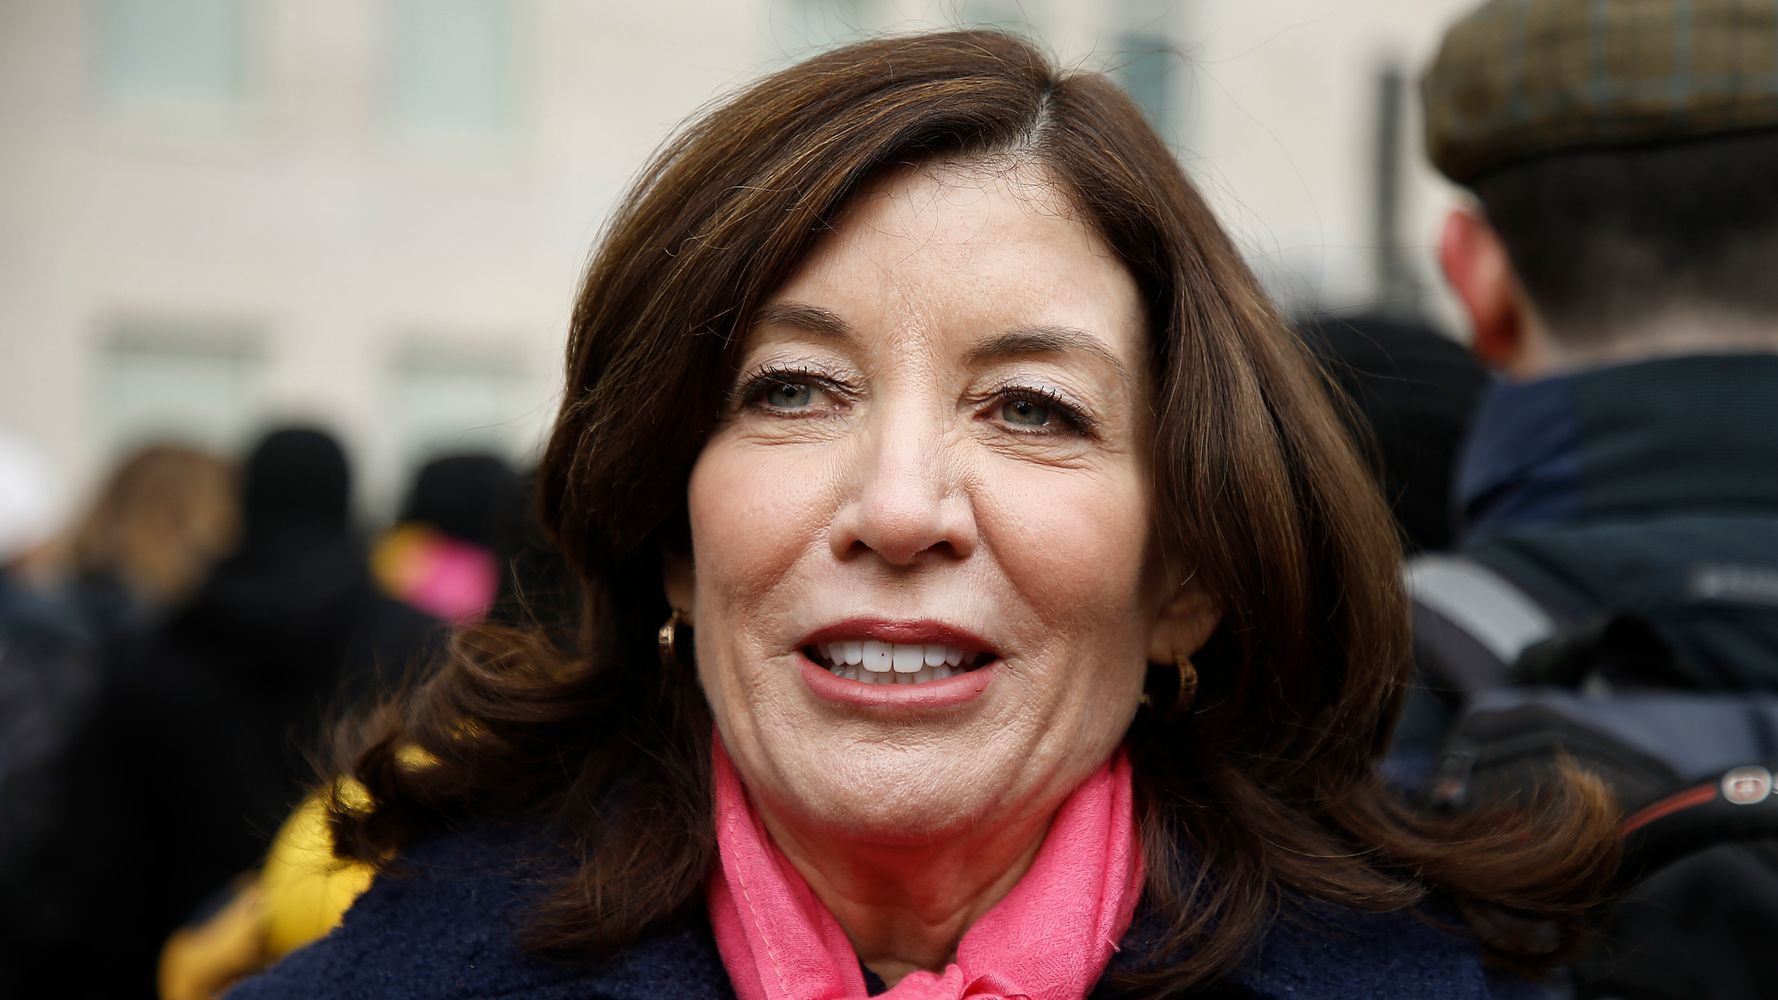 Kathy Hochul Set To Make History As New York's First Female Governor